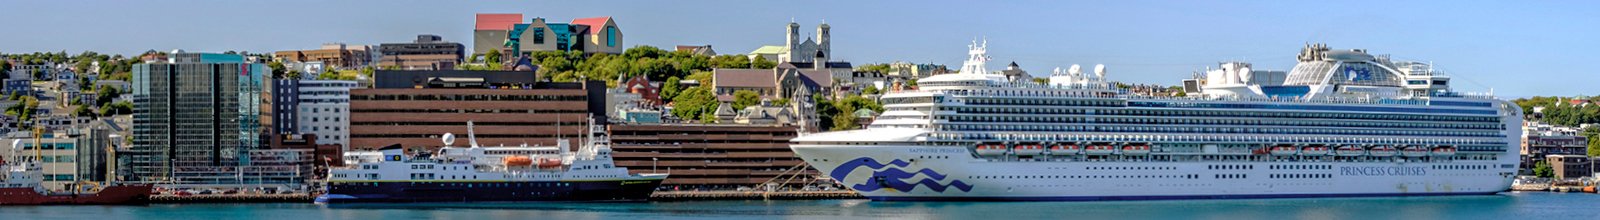 wide shot of St. John's Harbour with a cruise ship in the foreground